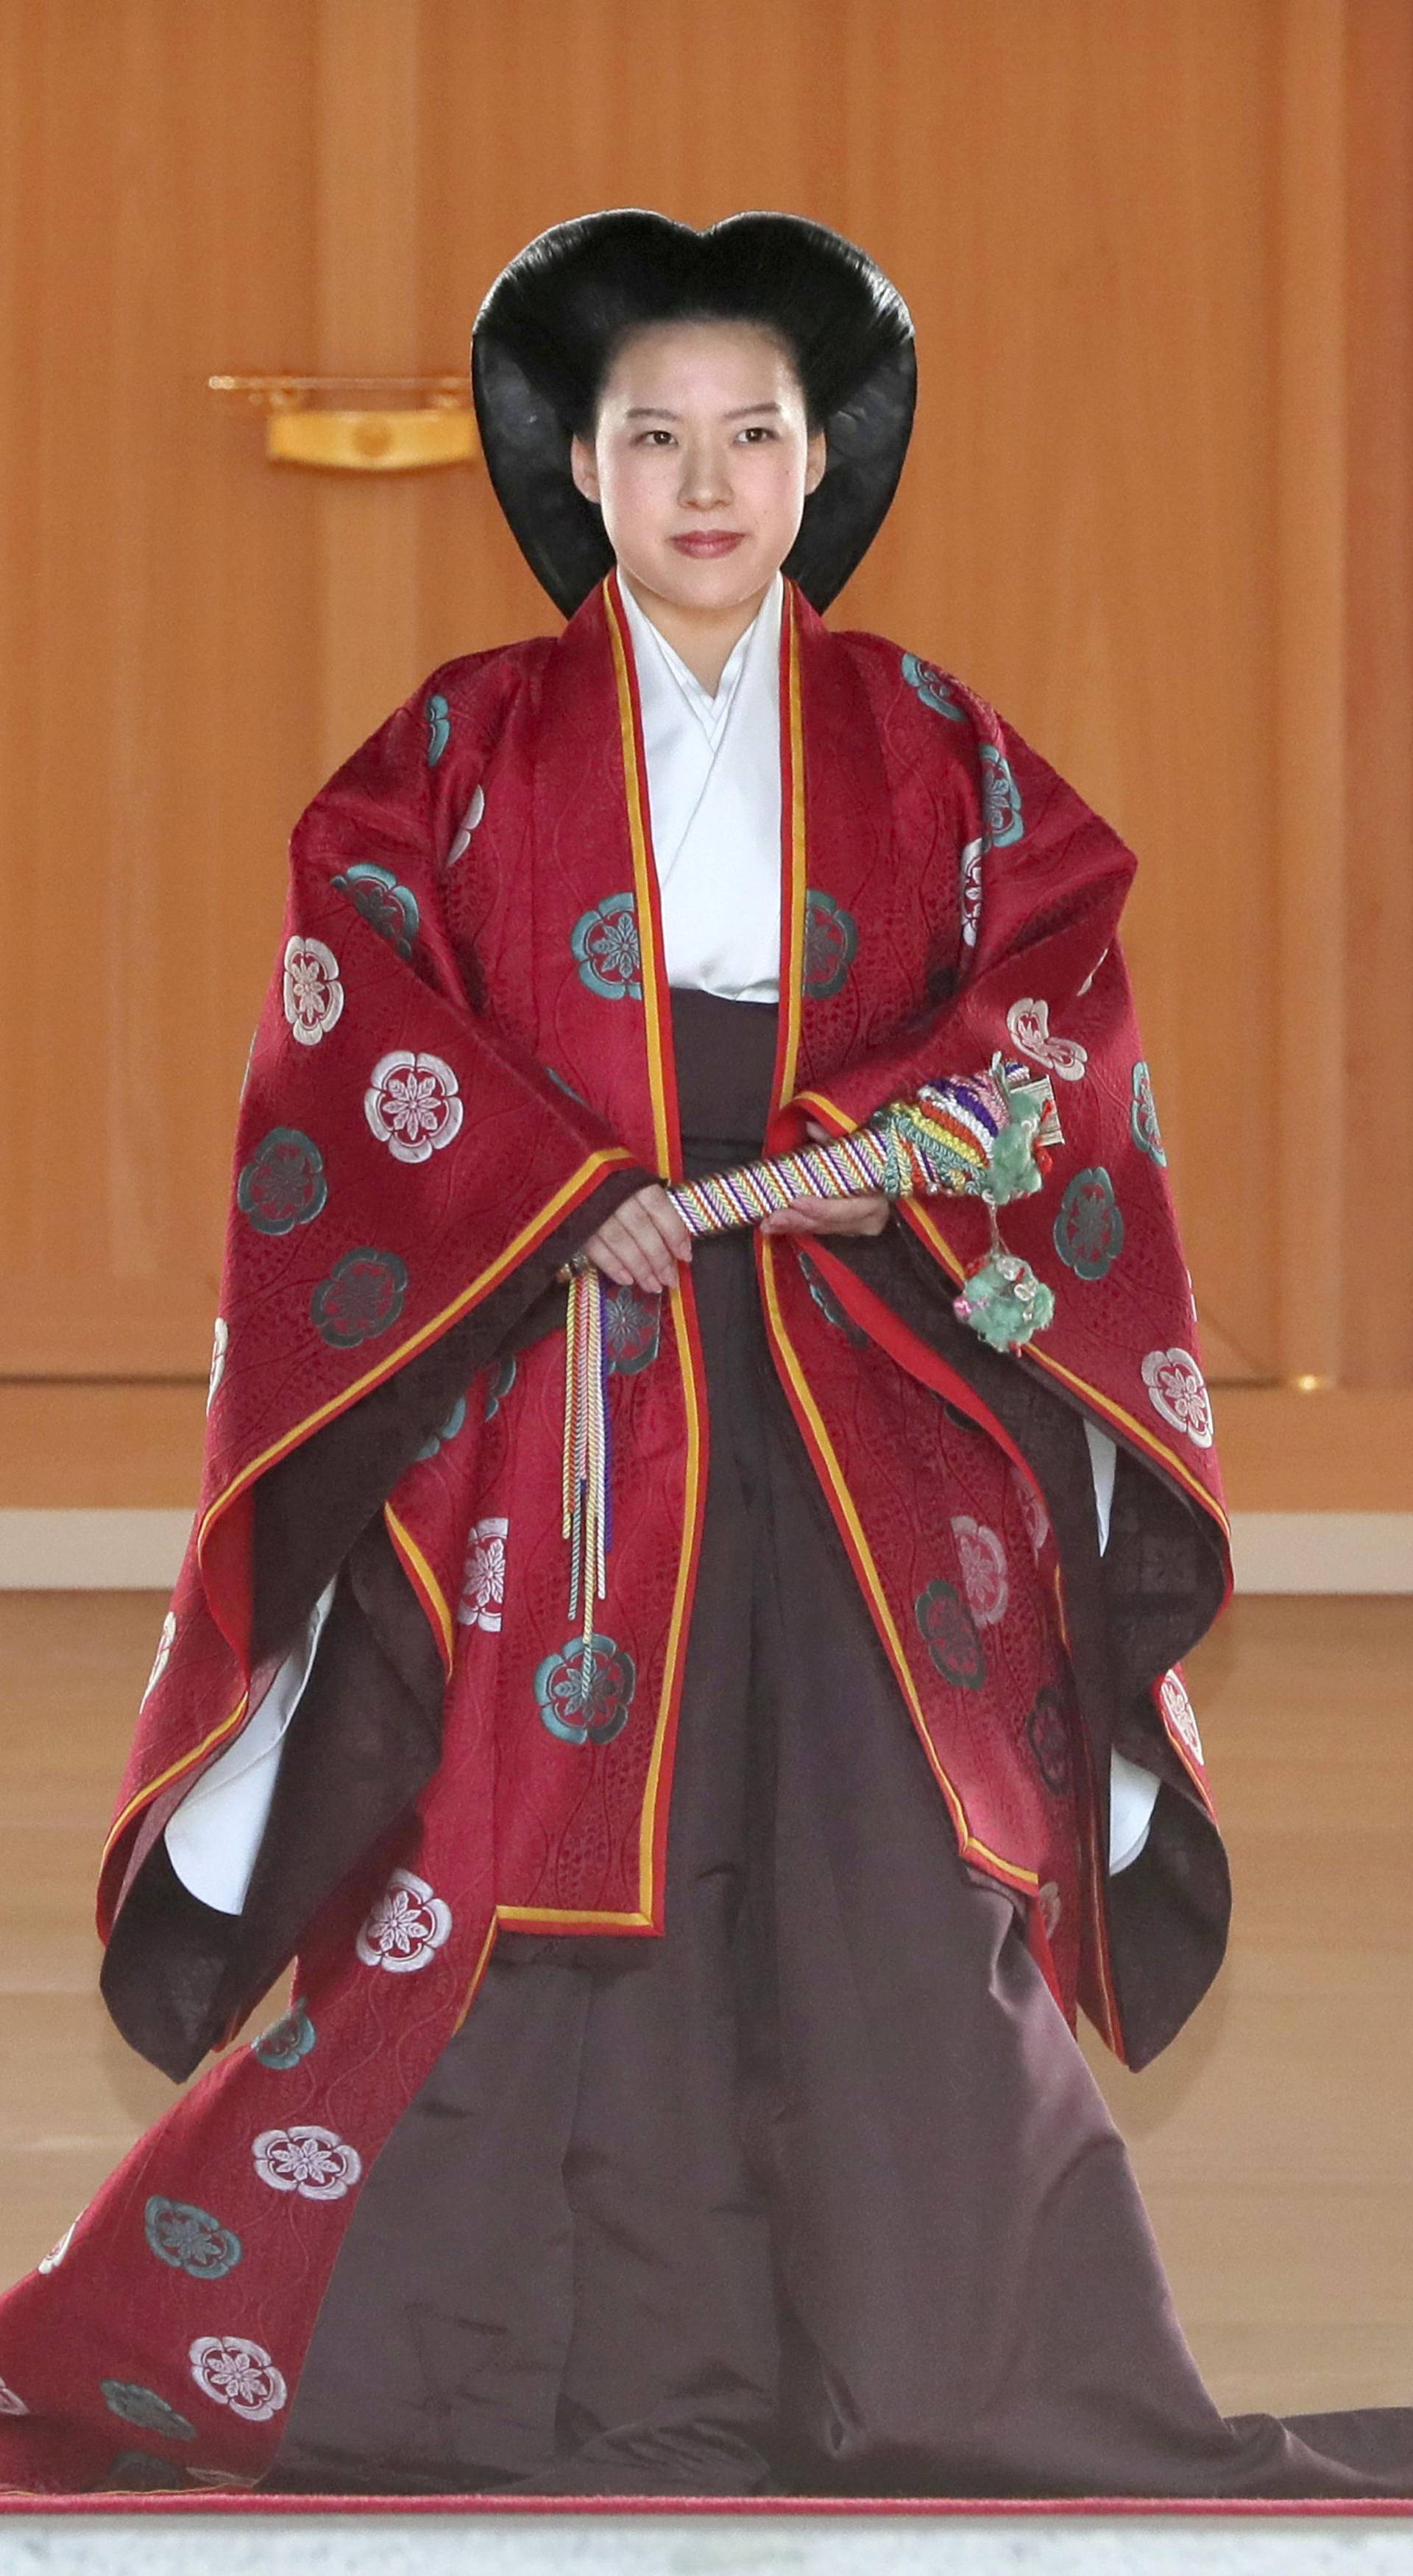 Japanese Princess Ayako is  pictured after her wedding ceremony at the Meiji Shrine in Tokyo